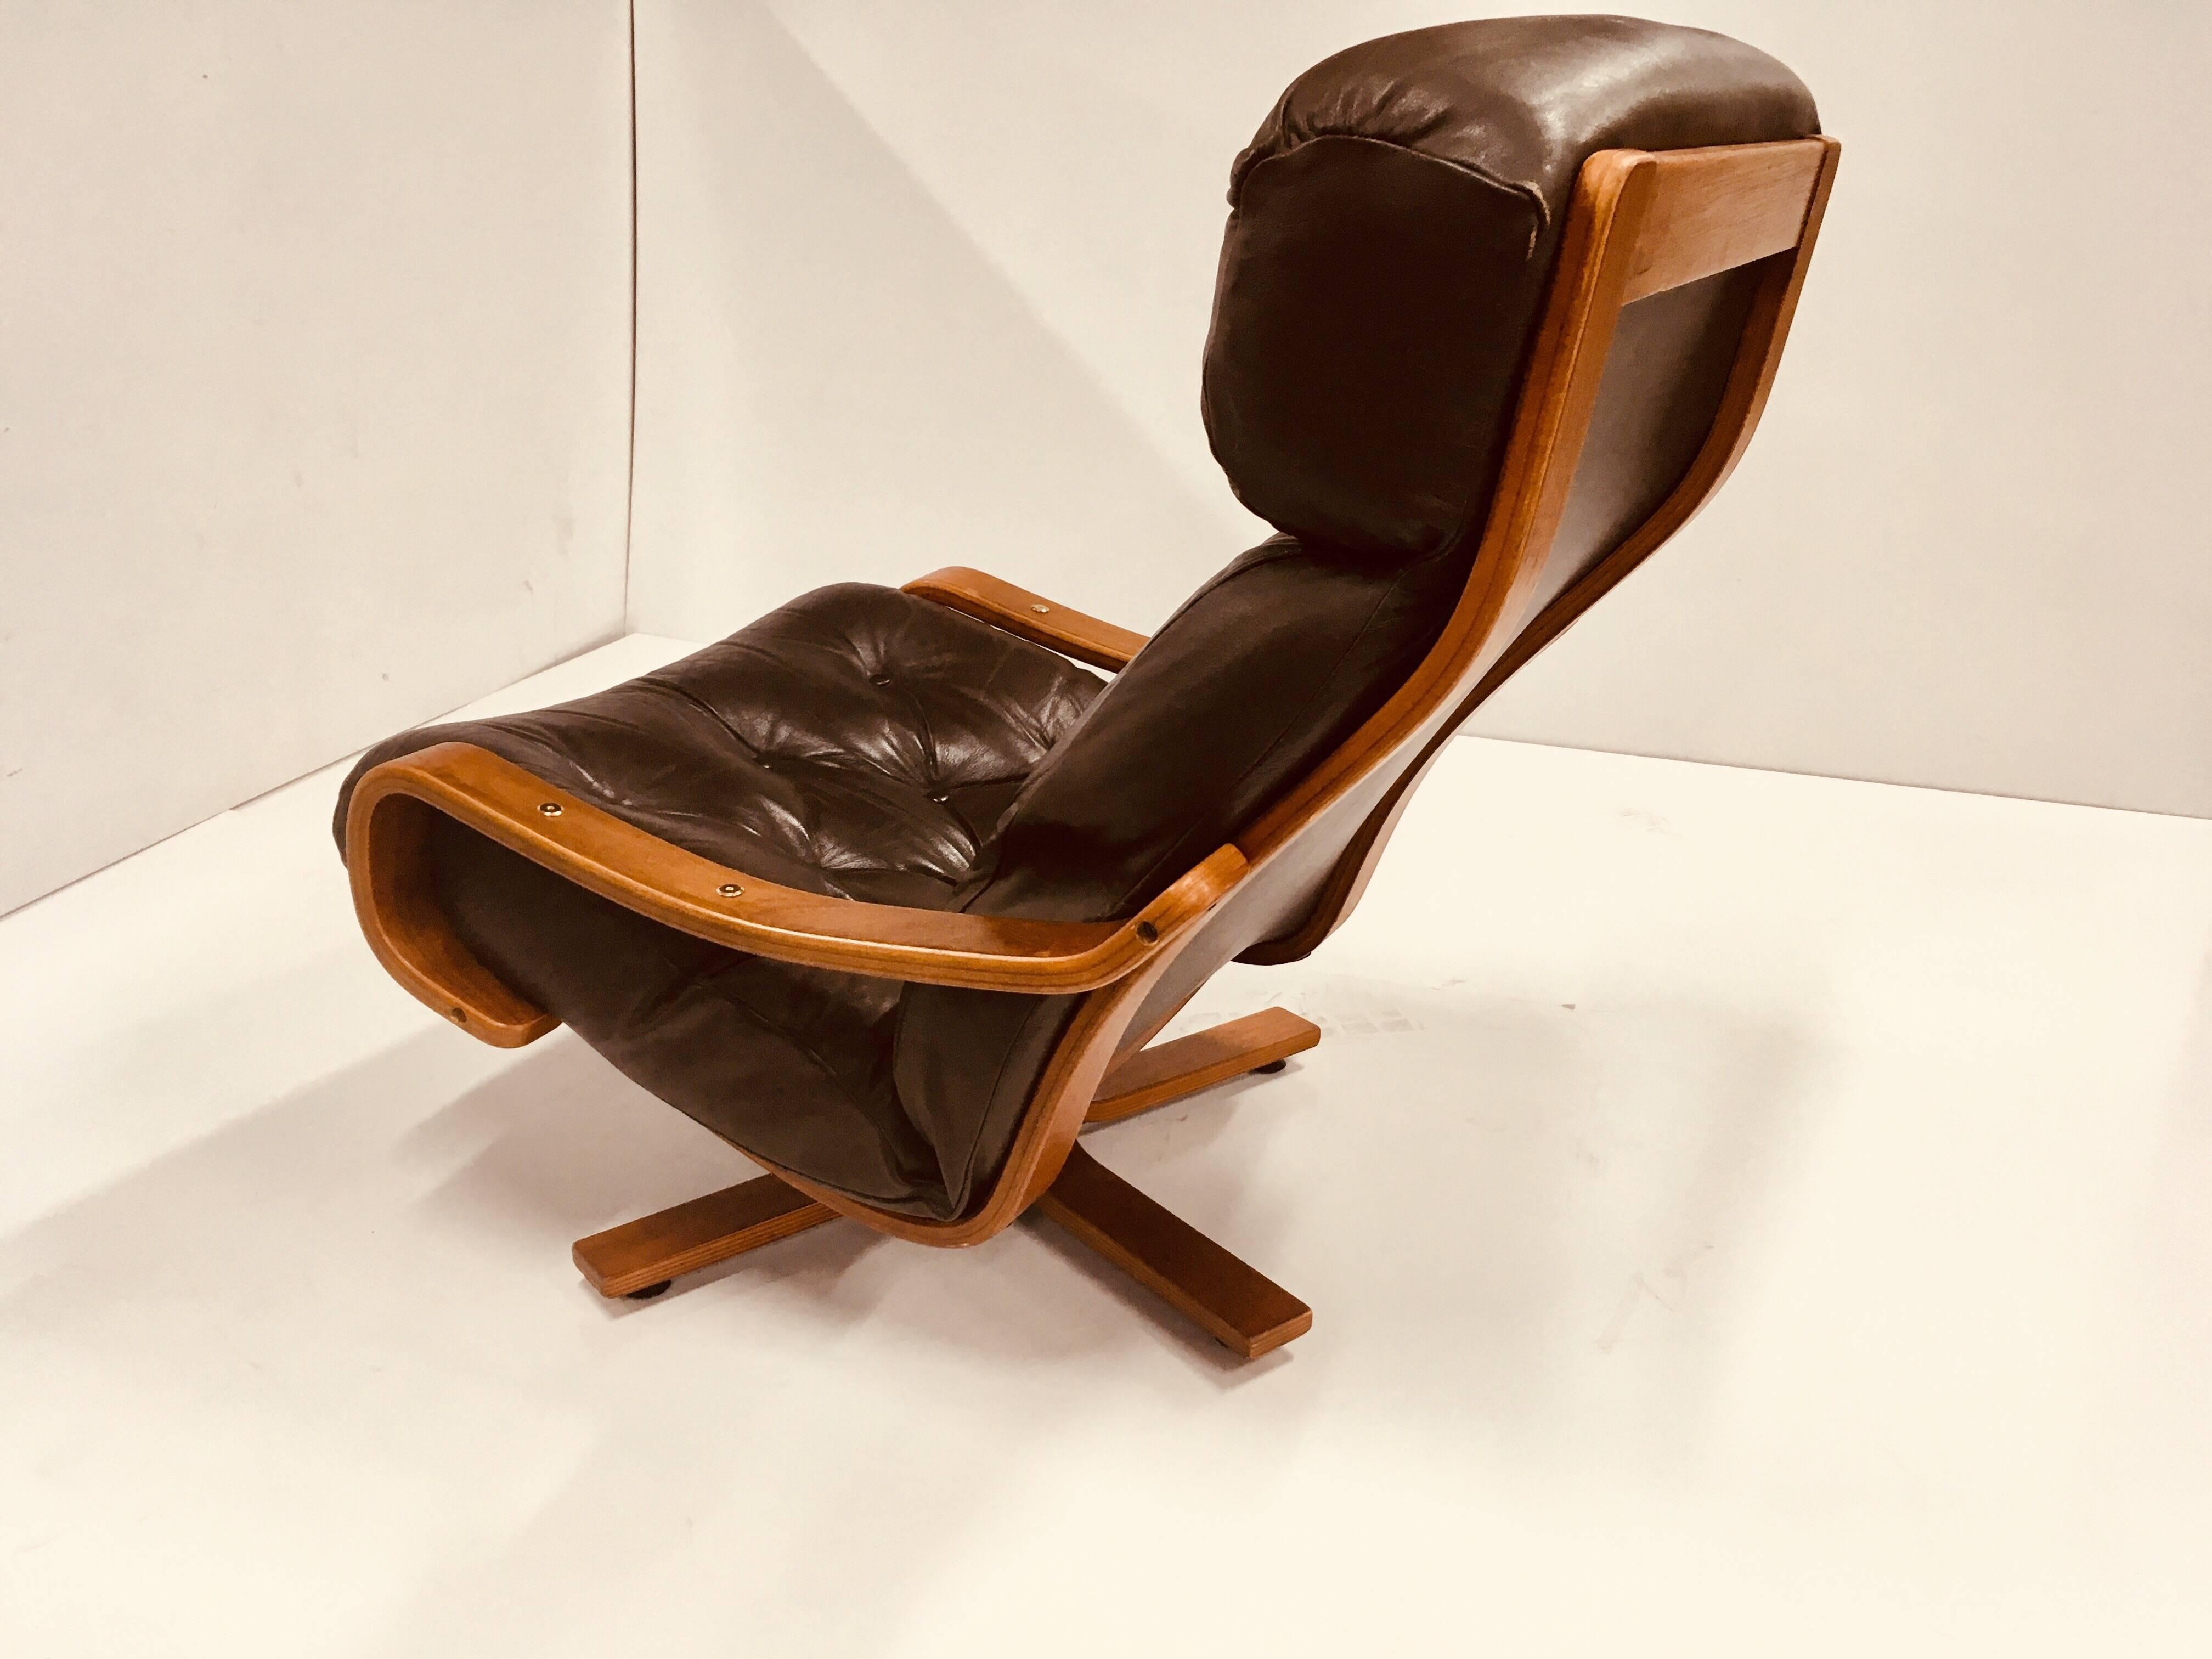 Danish deluxe leather armchair, stunning example by this highly regarded Australian maker. This is a particularly rare design in good original order, minor wear commensurate with age.

Pair available.